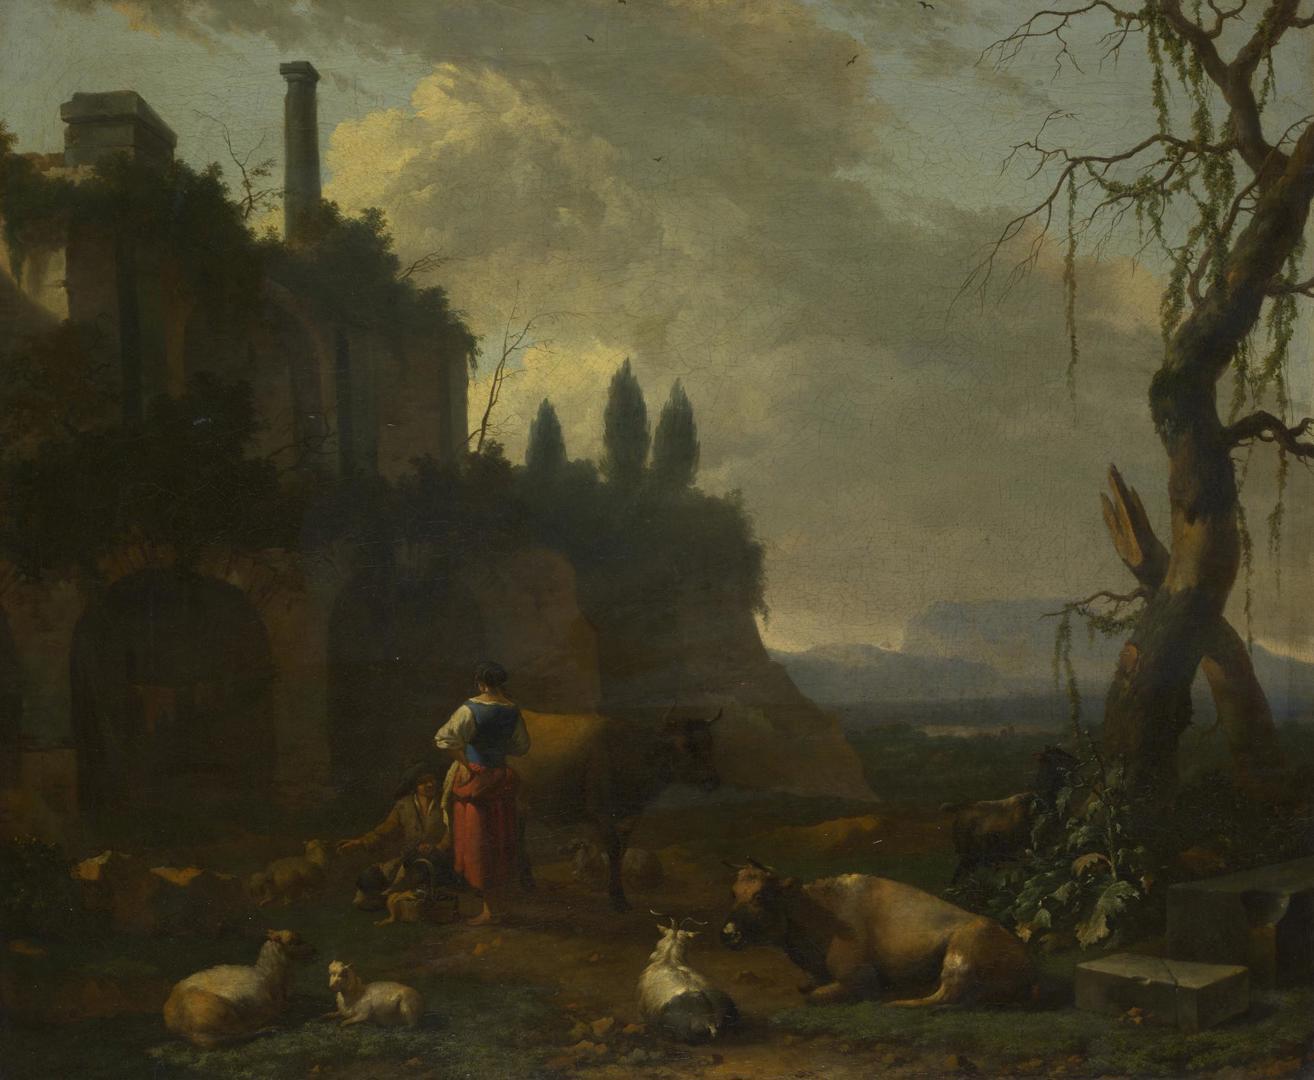 Peasants with Cattle by a Ruin by Abraham Begeijn